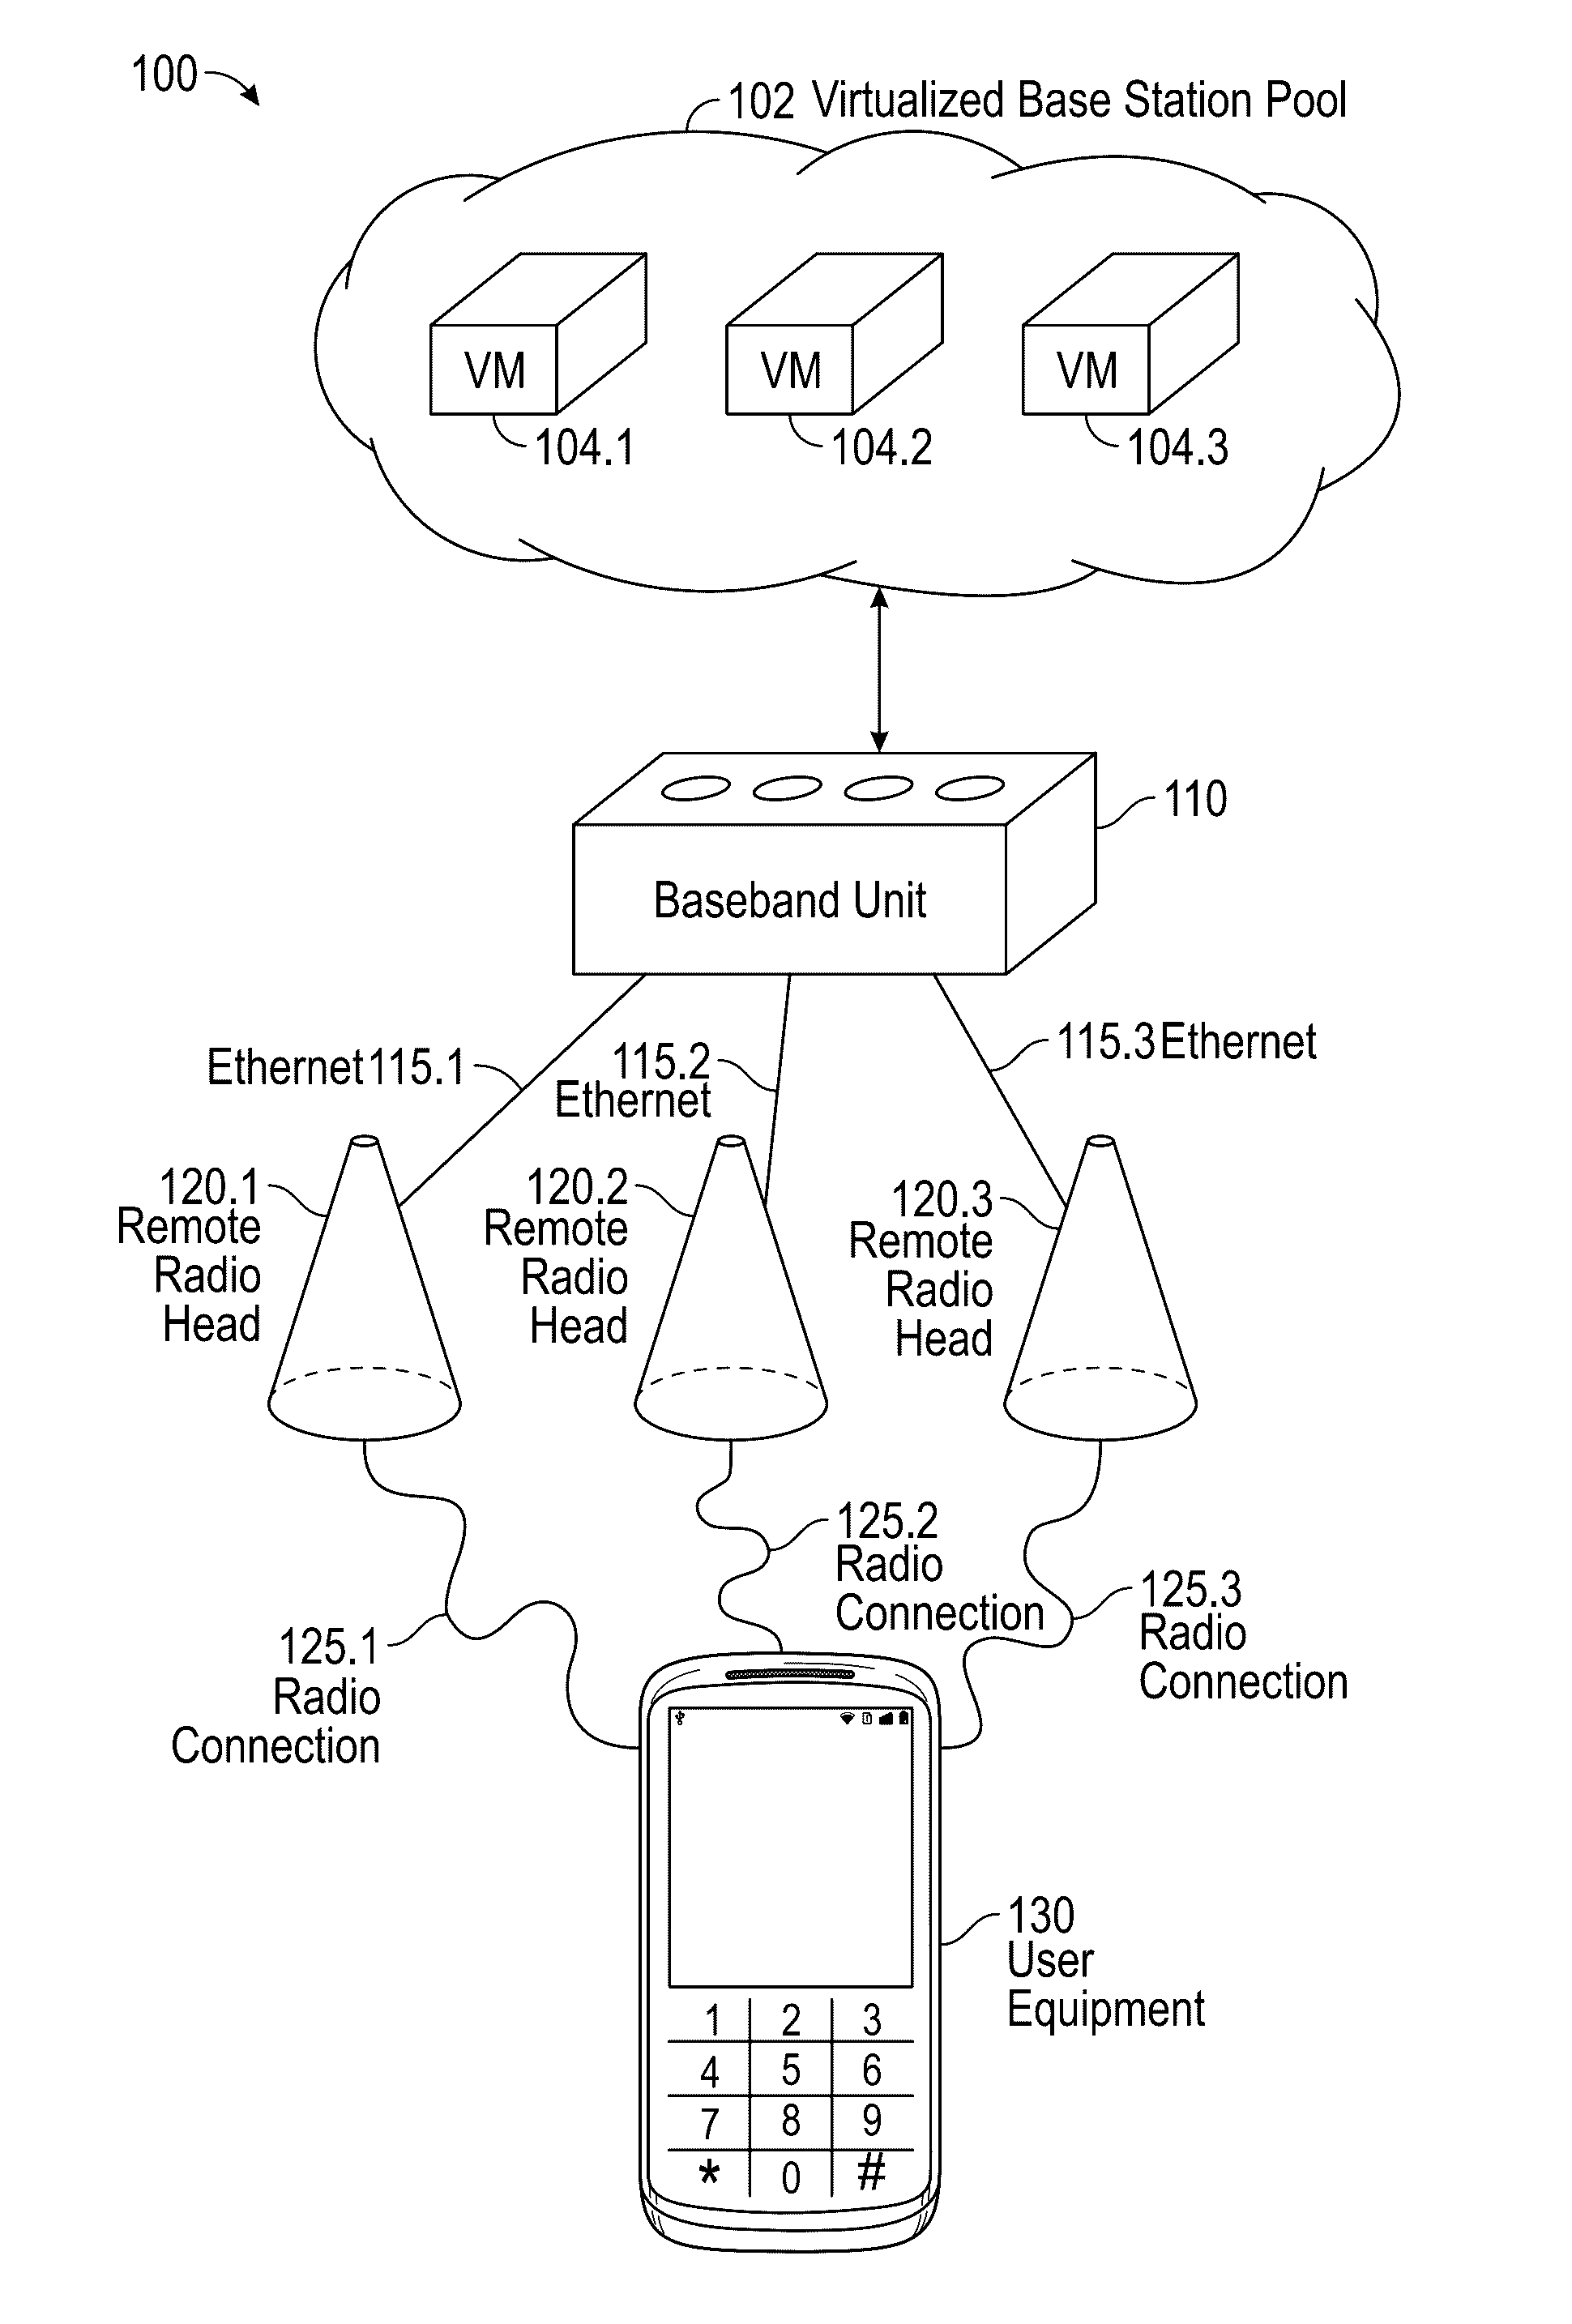 Ethernet cloud radio access network fronthaul with multi-antenna synchronization